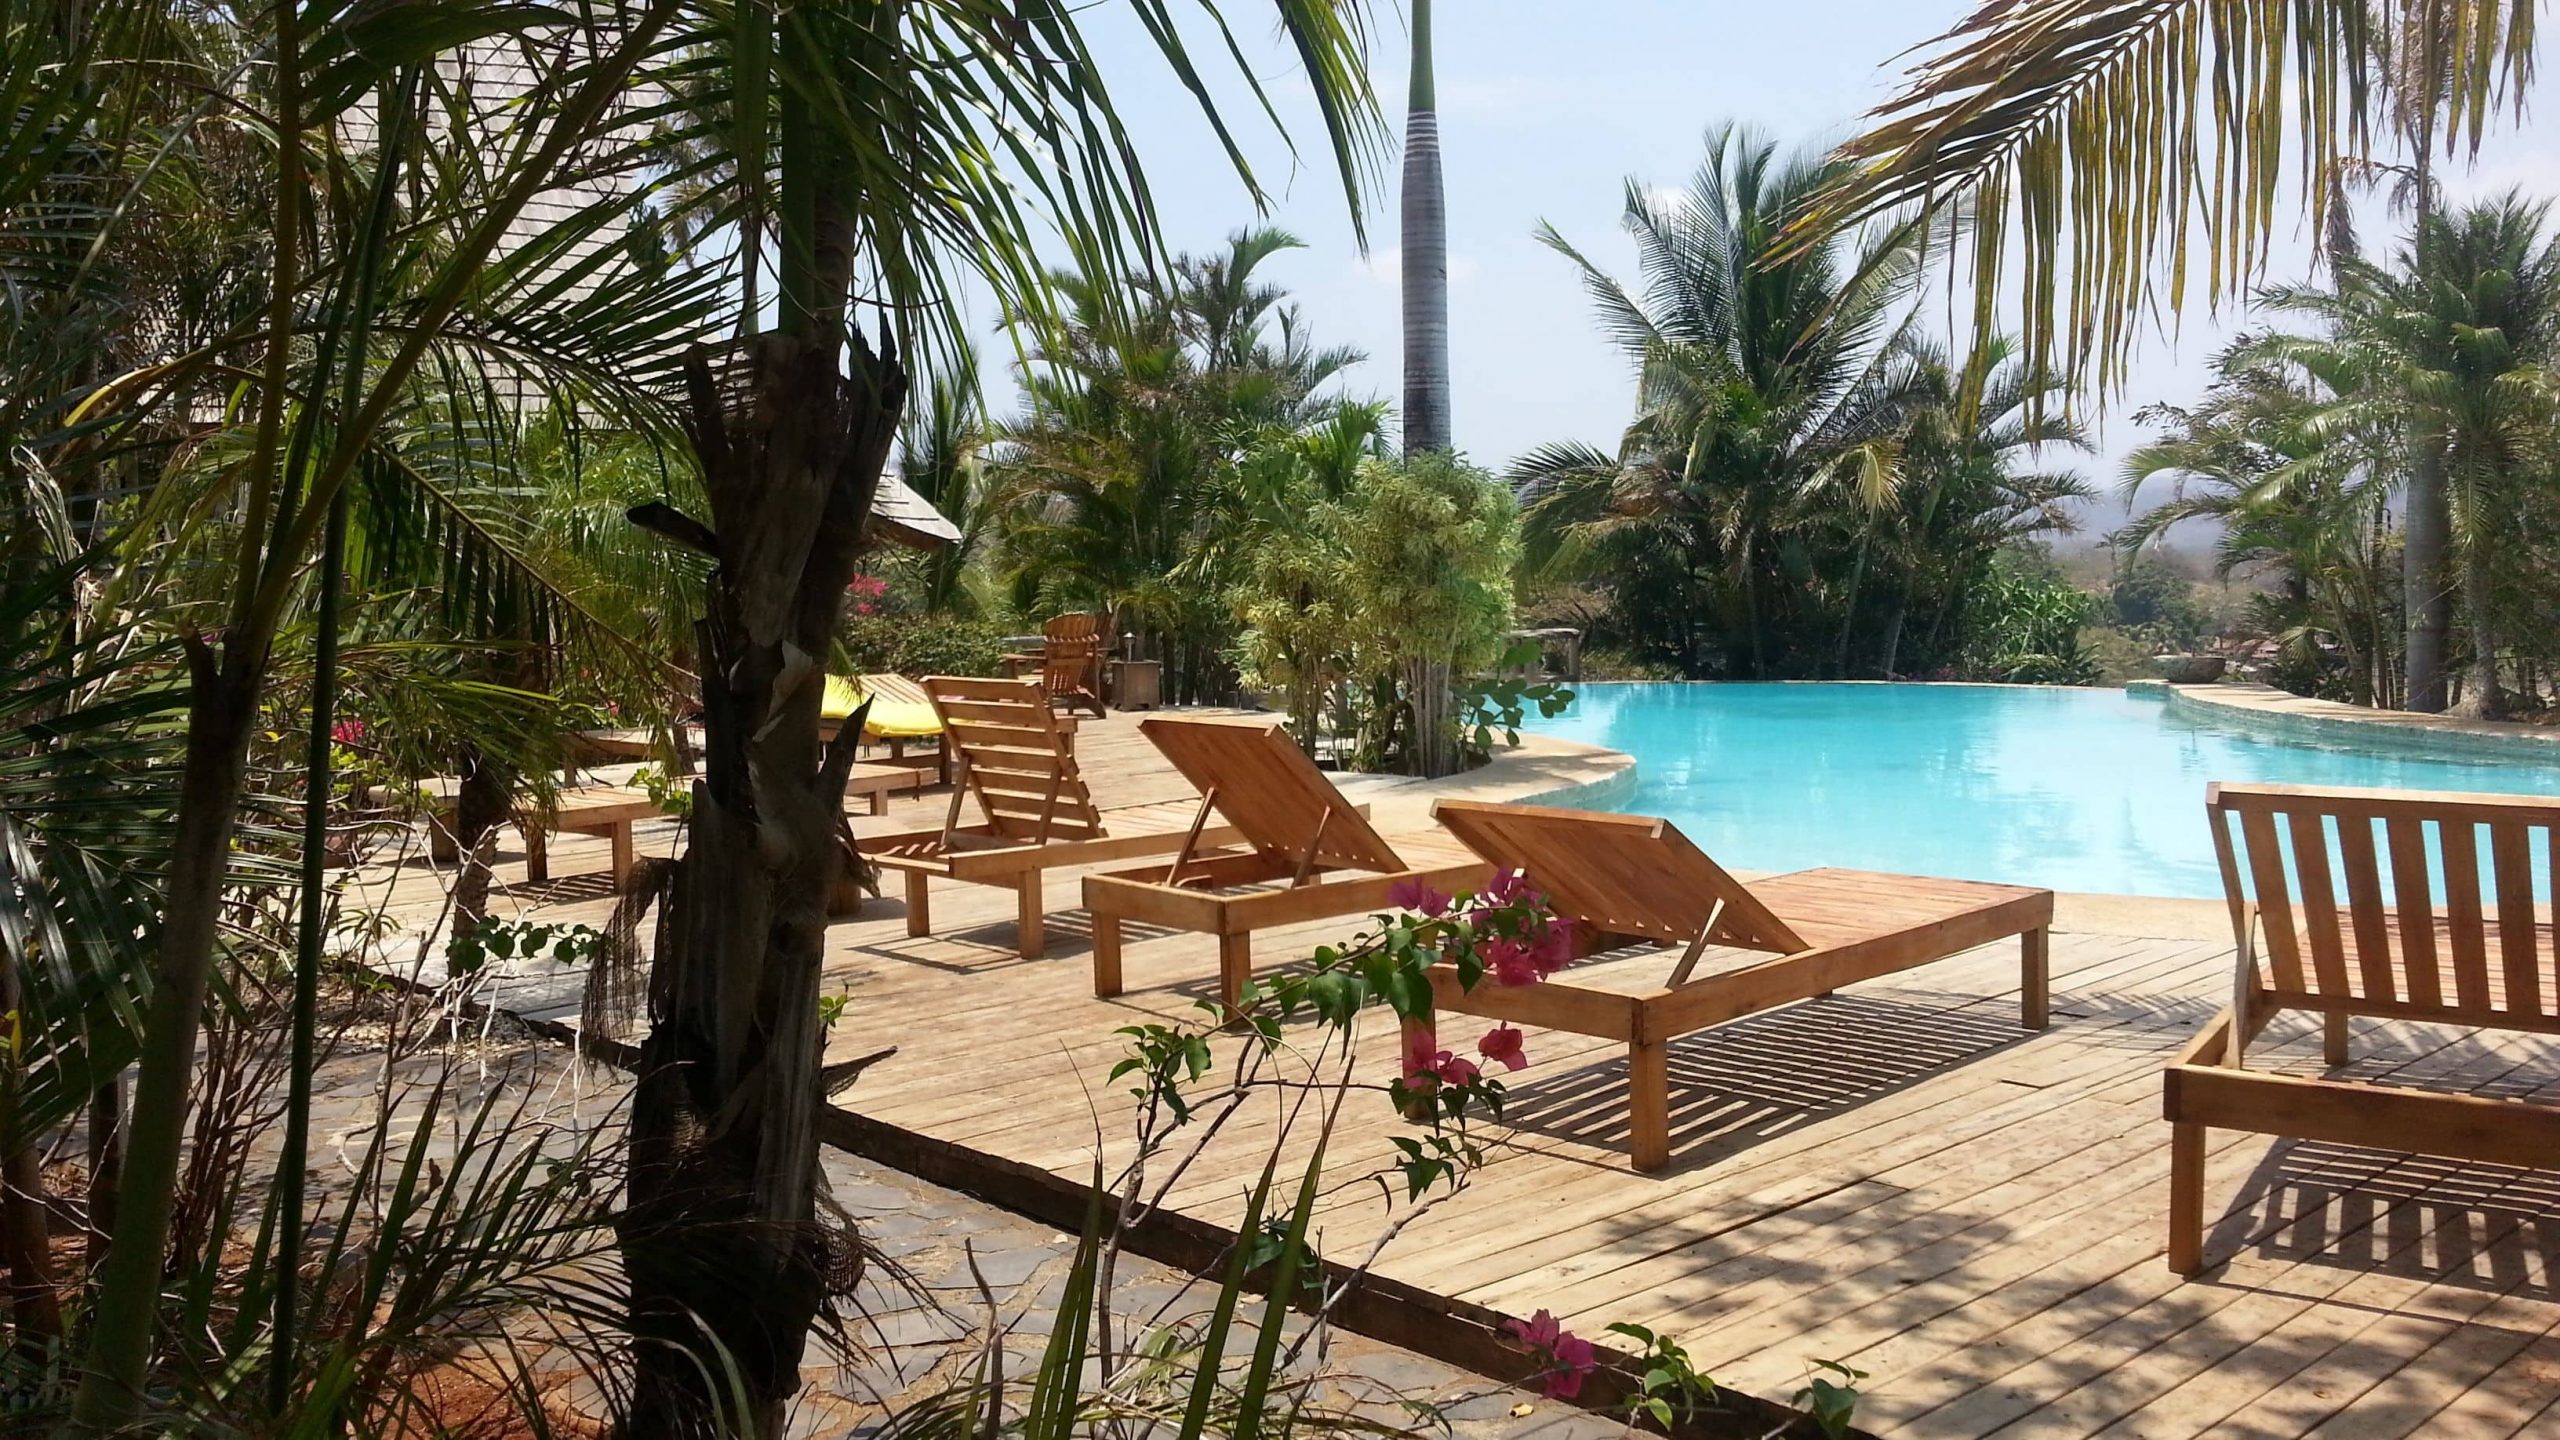 A view of the pool with wooden deck sun loungers for guests of El-Sabanero Eco Lodge